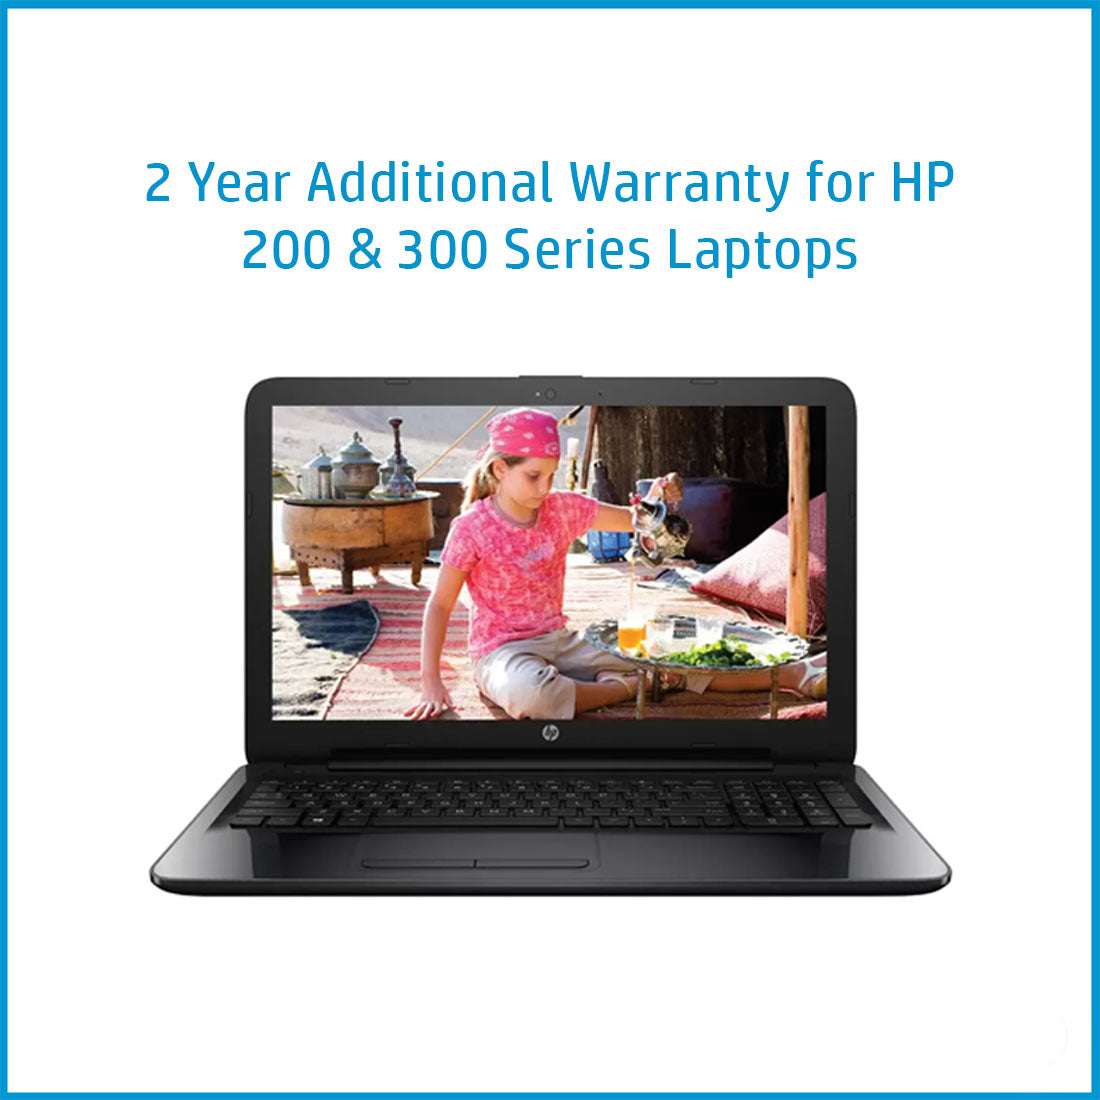 HP Care Pack 2 Years Additional Warranty for HP 200 & 300 Series Laptops - NOT A LAPTOP